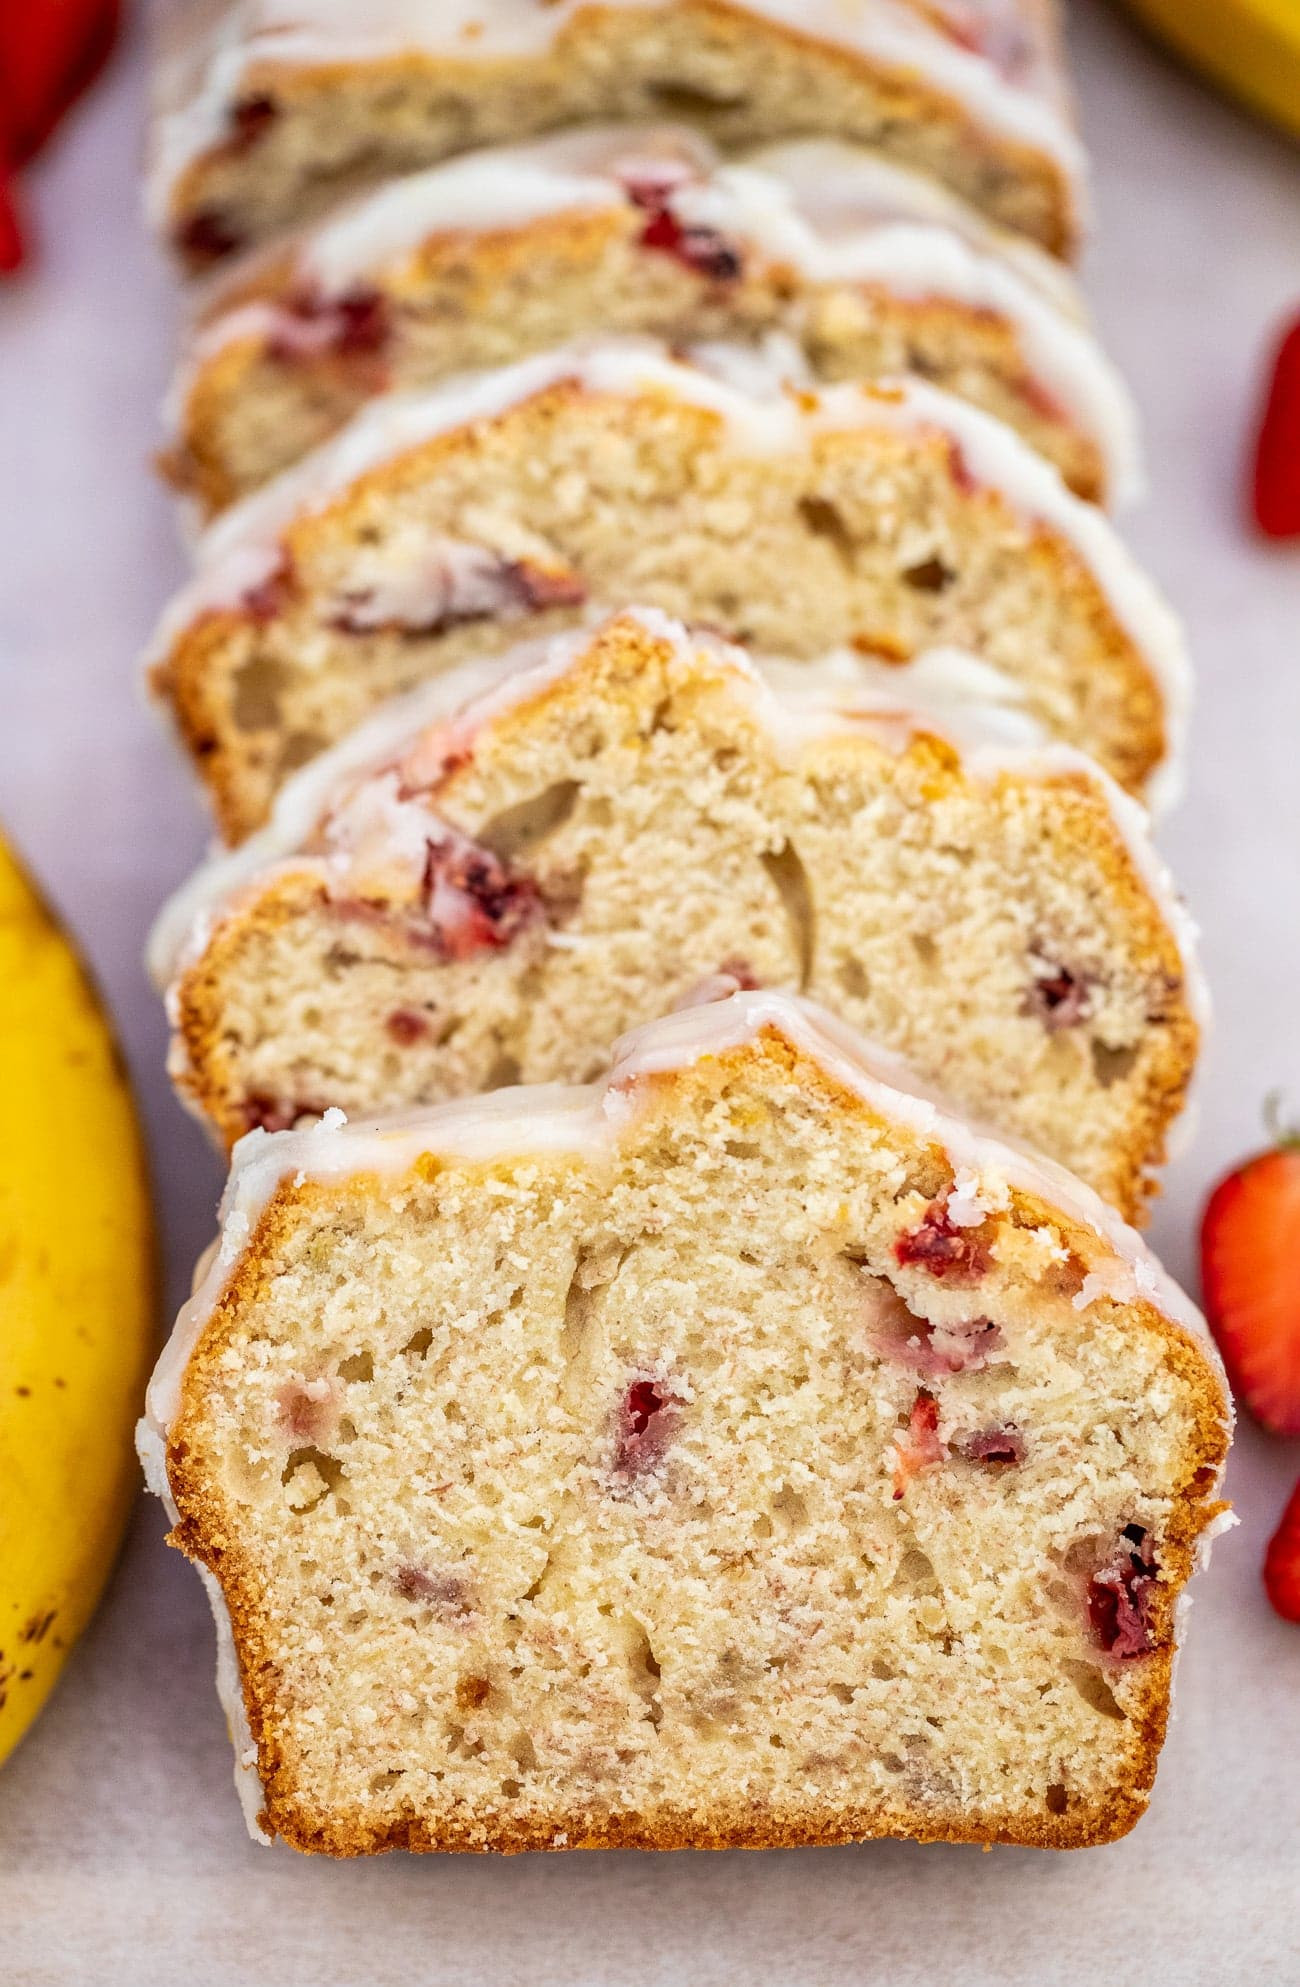 Banana Strawberry Bread Unique Strawberry Banana Bread [video] Sweet and Savory Meals